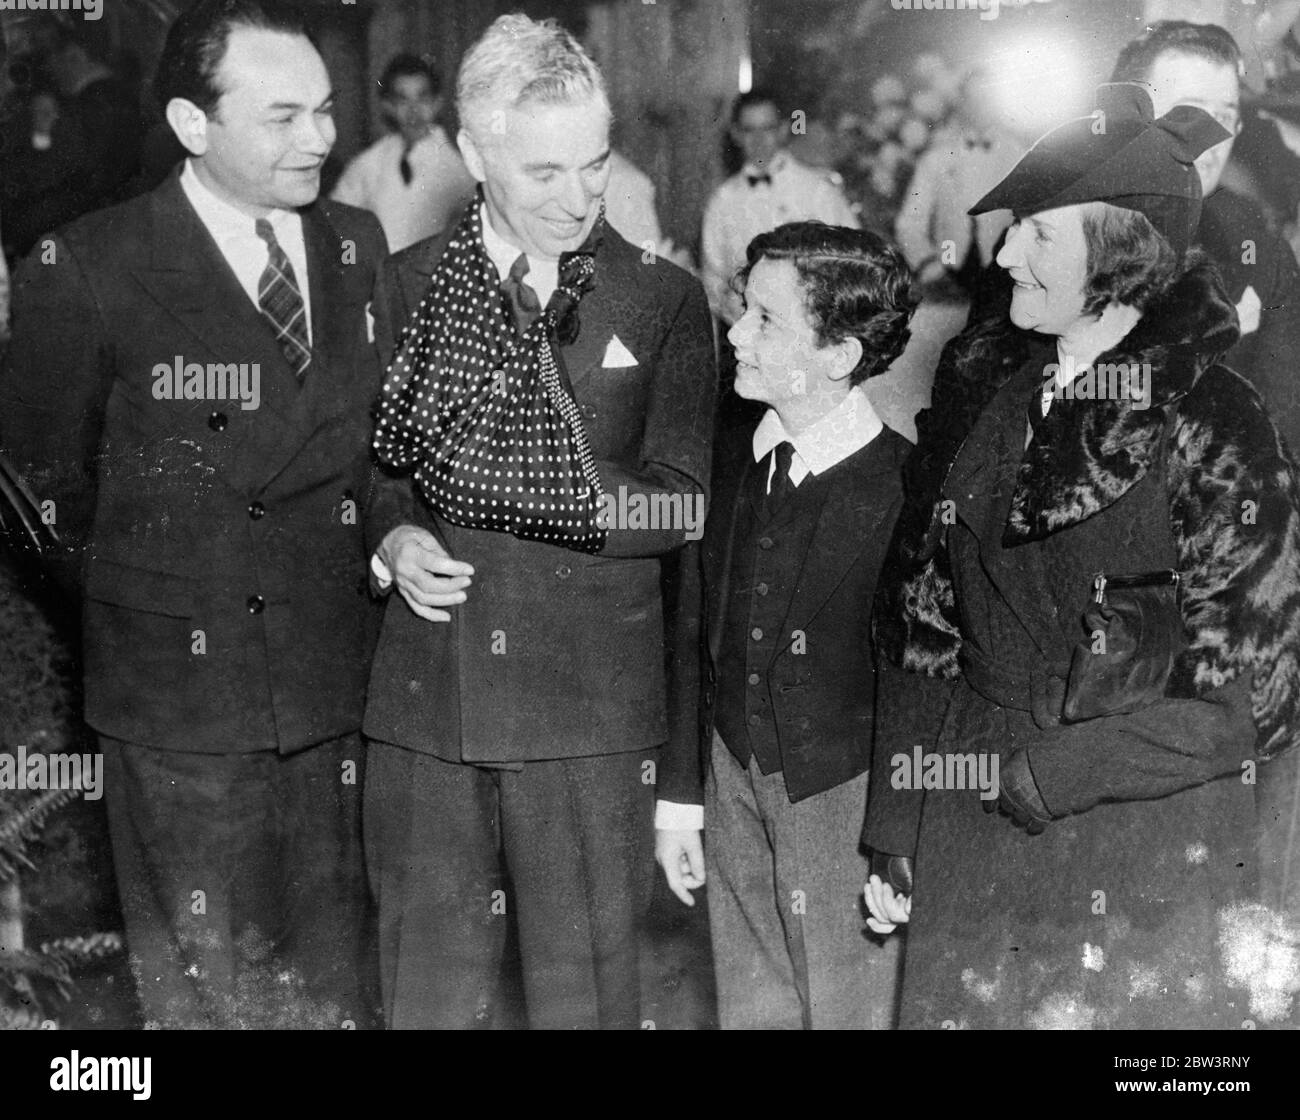 Charlie Chaplin with his arm in a sling . Freddie Bartholomew at show to raise money for Will Rogers Memorial . Left to right - Edward G Robinson , Charlie Chaplin ( with arm in sling ) , Freddie Bartholomew , and Freddie 's aunt at the show . 12 December 1935 Stock Photo